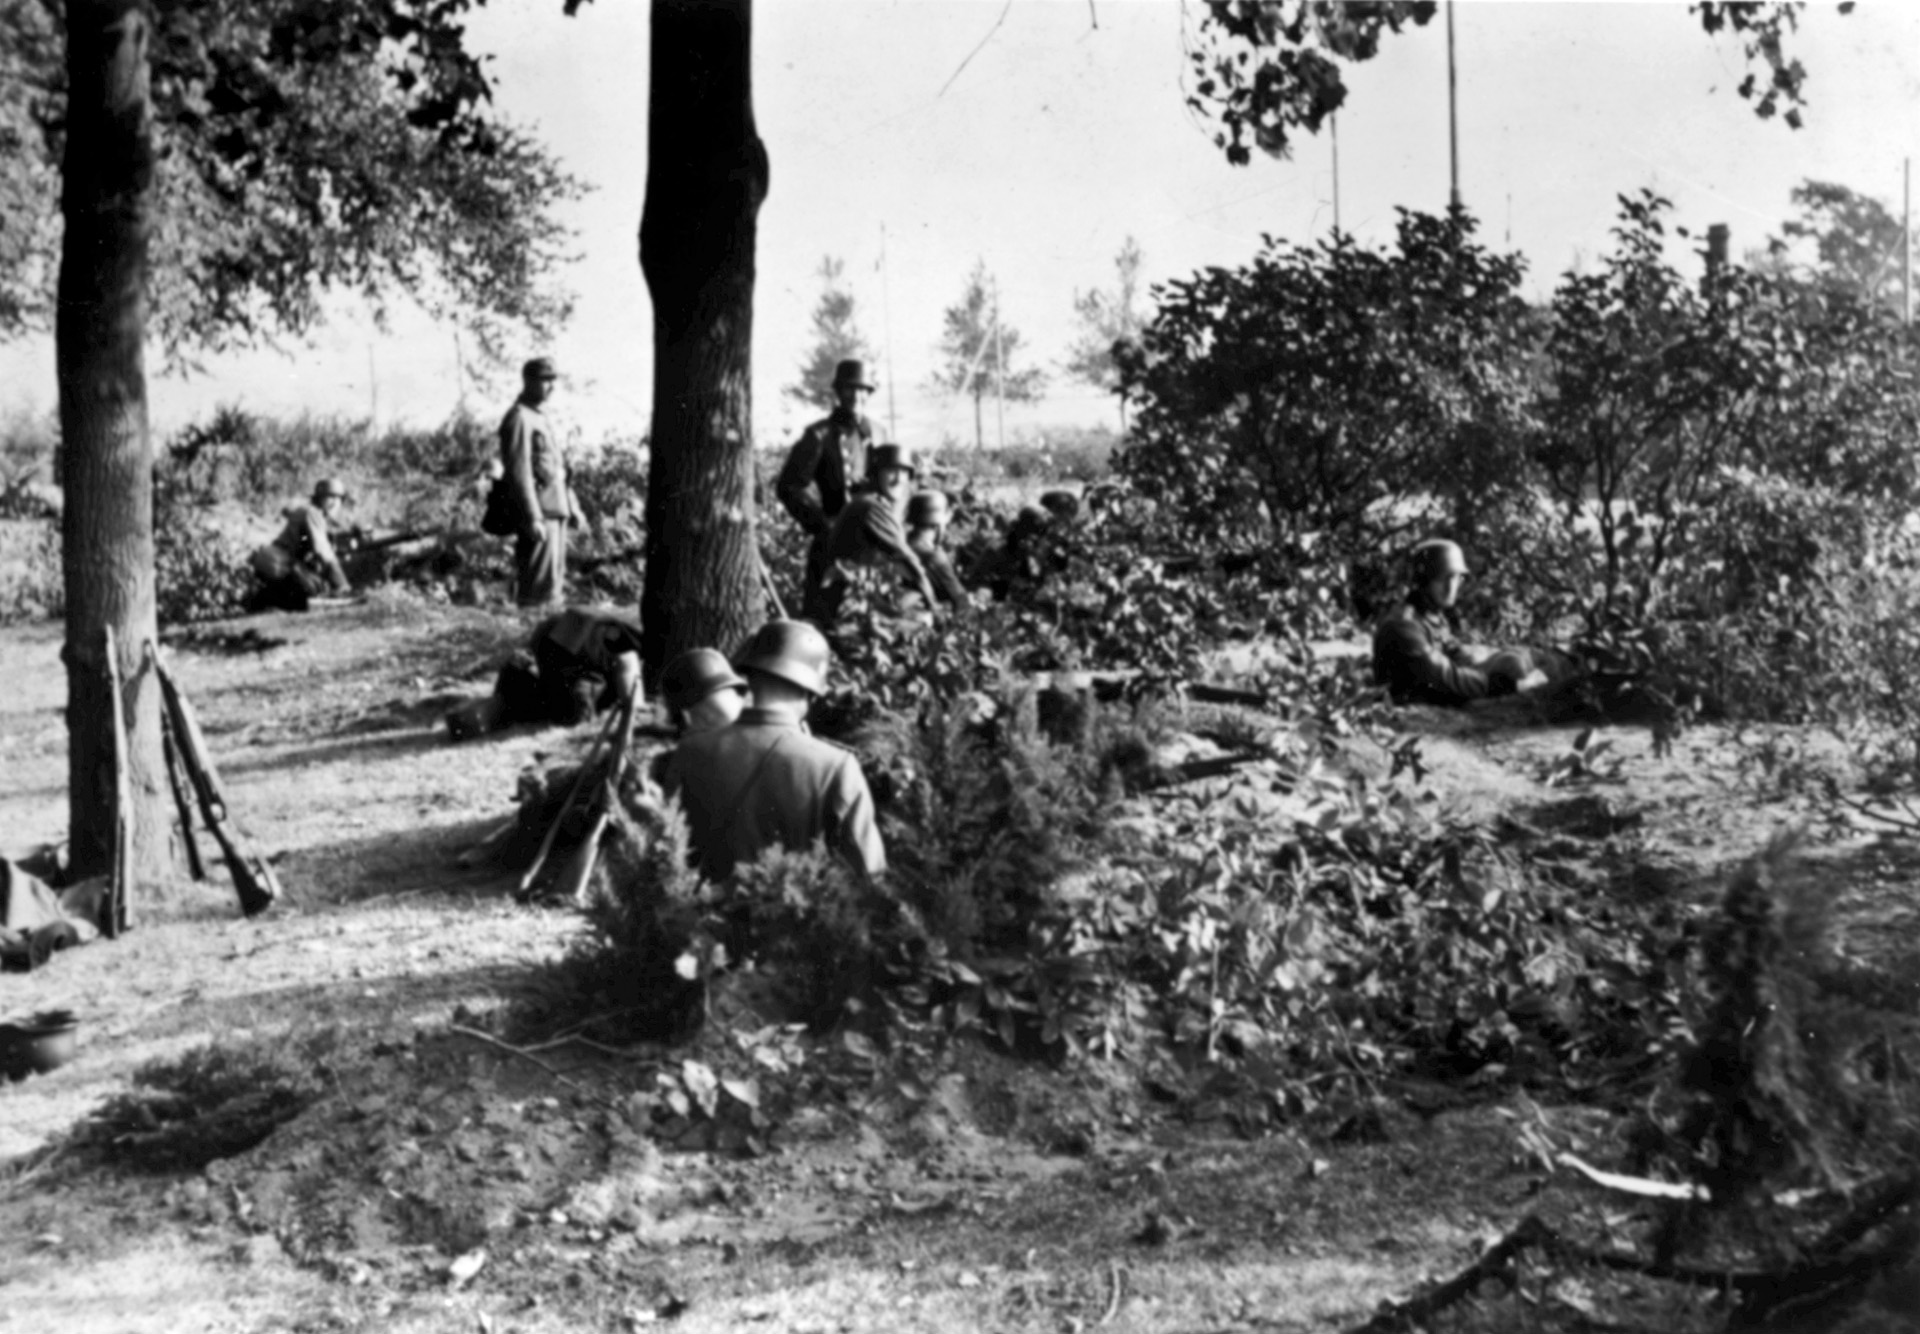 Paratroopers of the 1st Airborne Division ran headlong into several units, such as this SS police unit on the outskirts of the city, undergoing training. These small units stubbornly stood their ground and contested the British advance. 